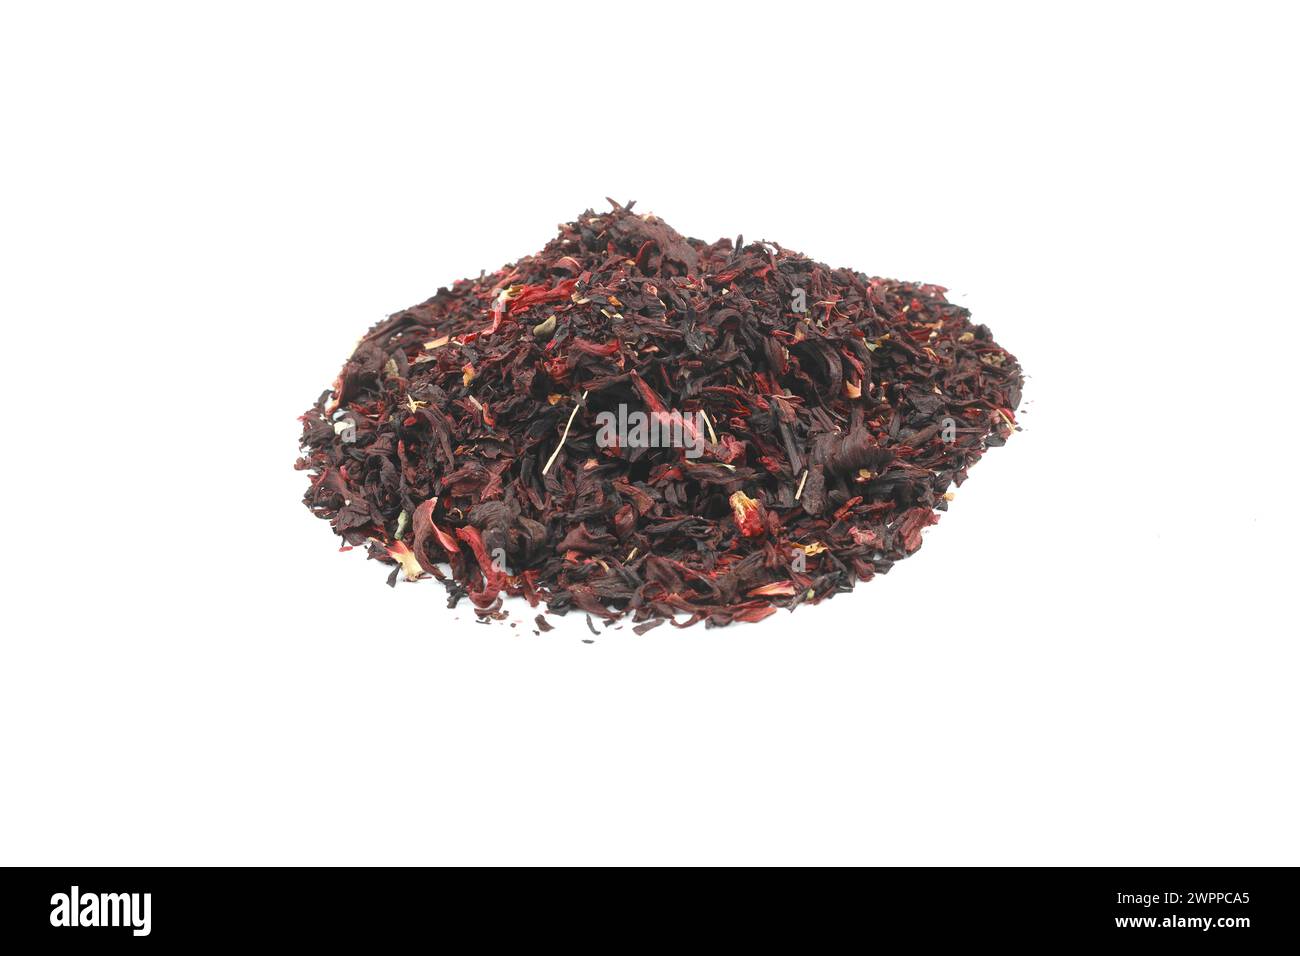 Hibiscus, a pile of red dried Hibiscus tea leaves. Karkade tea. On white background. View from above. Stock Photo